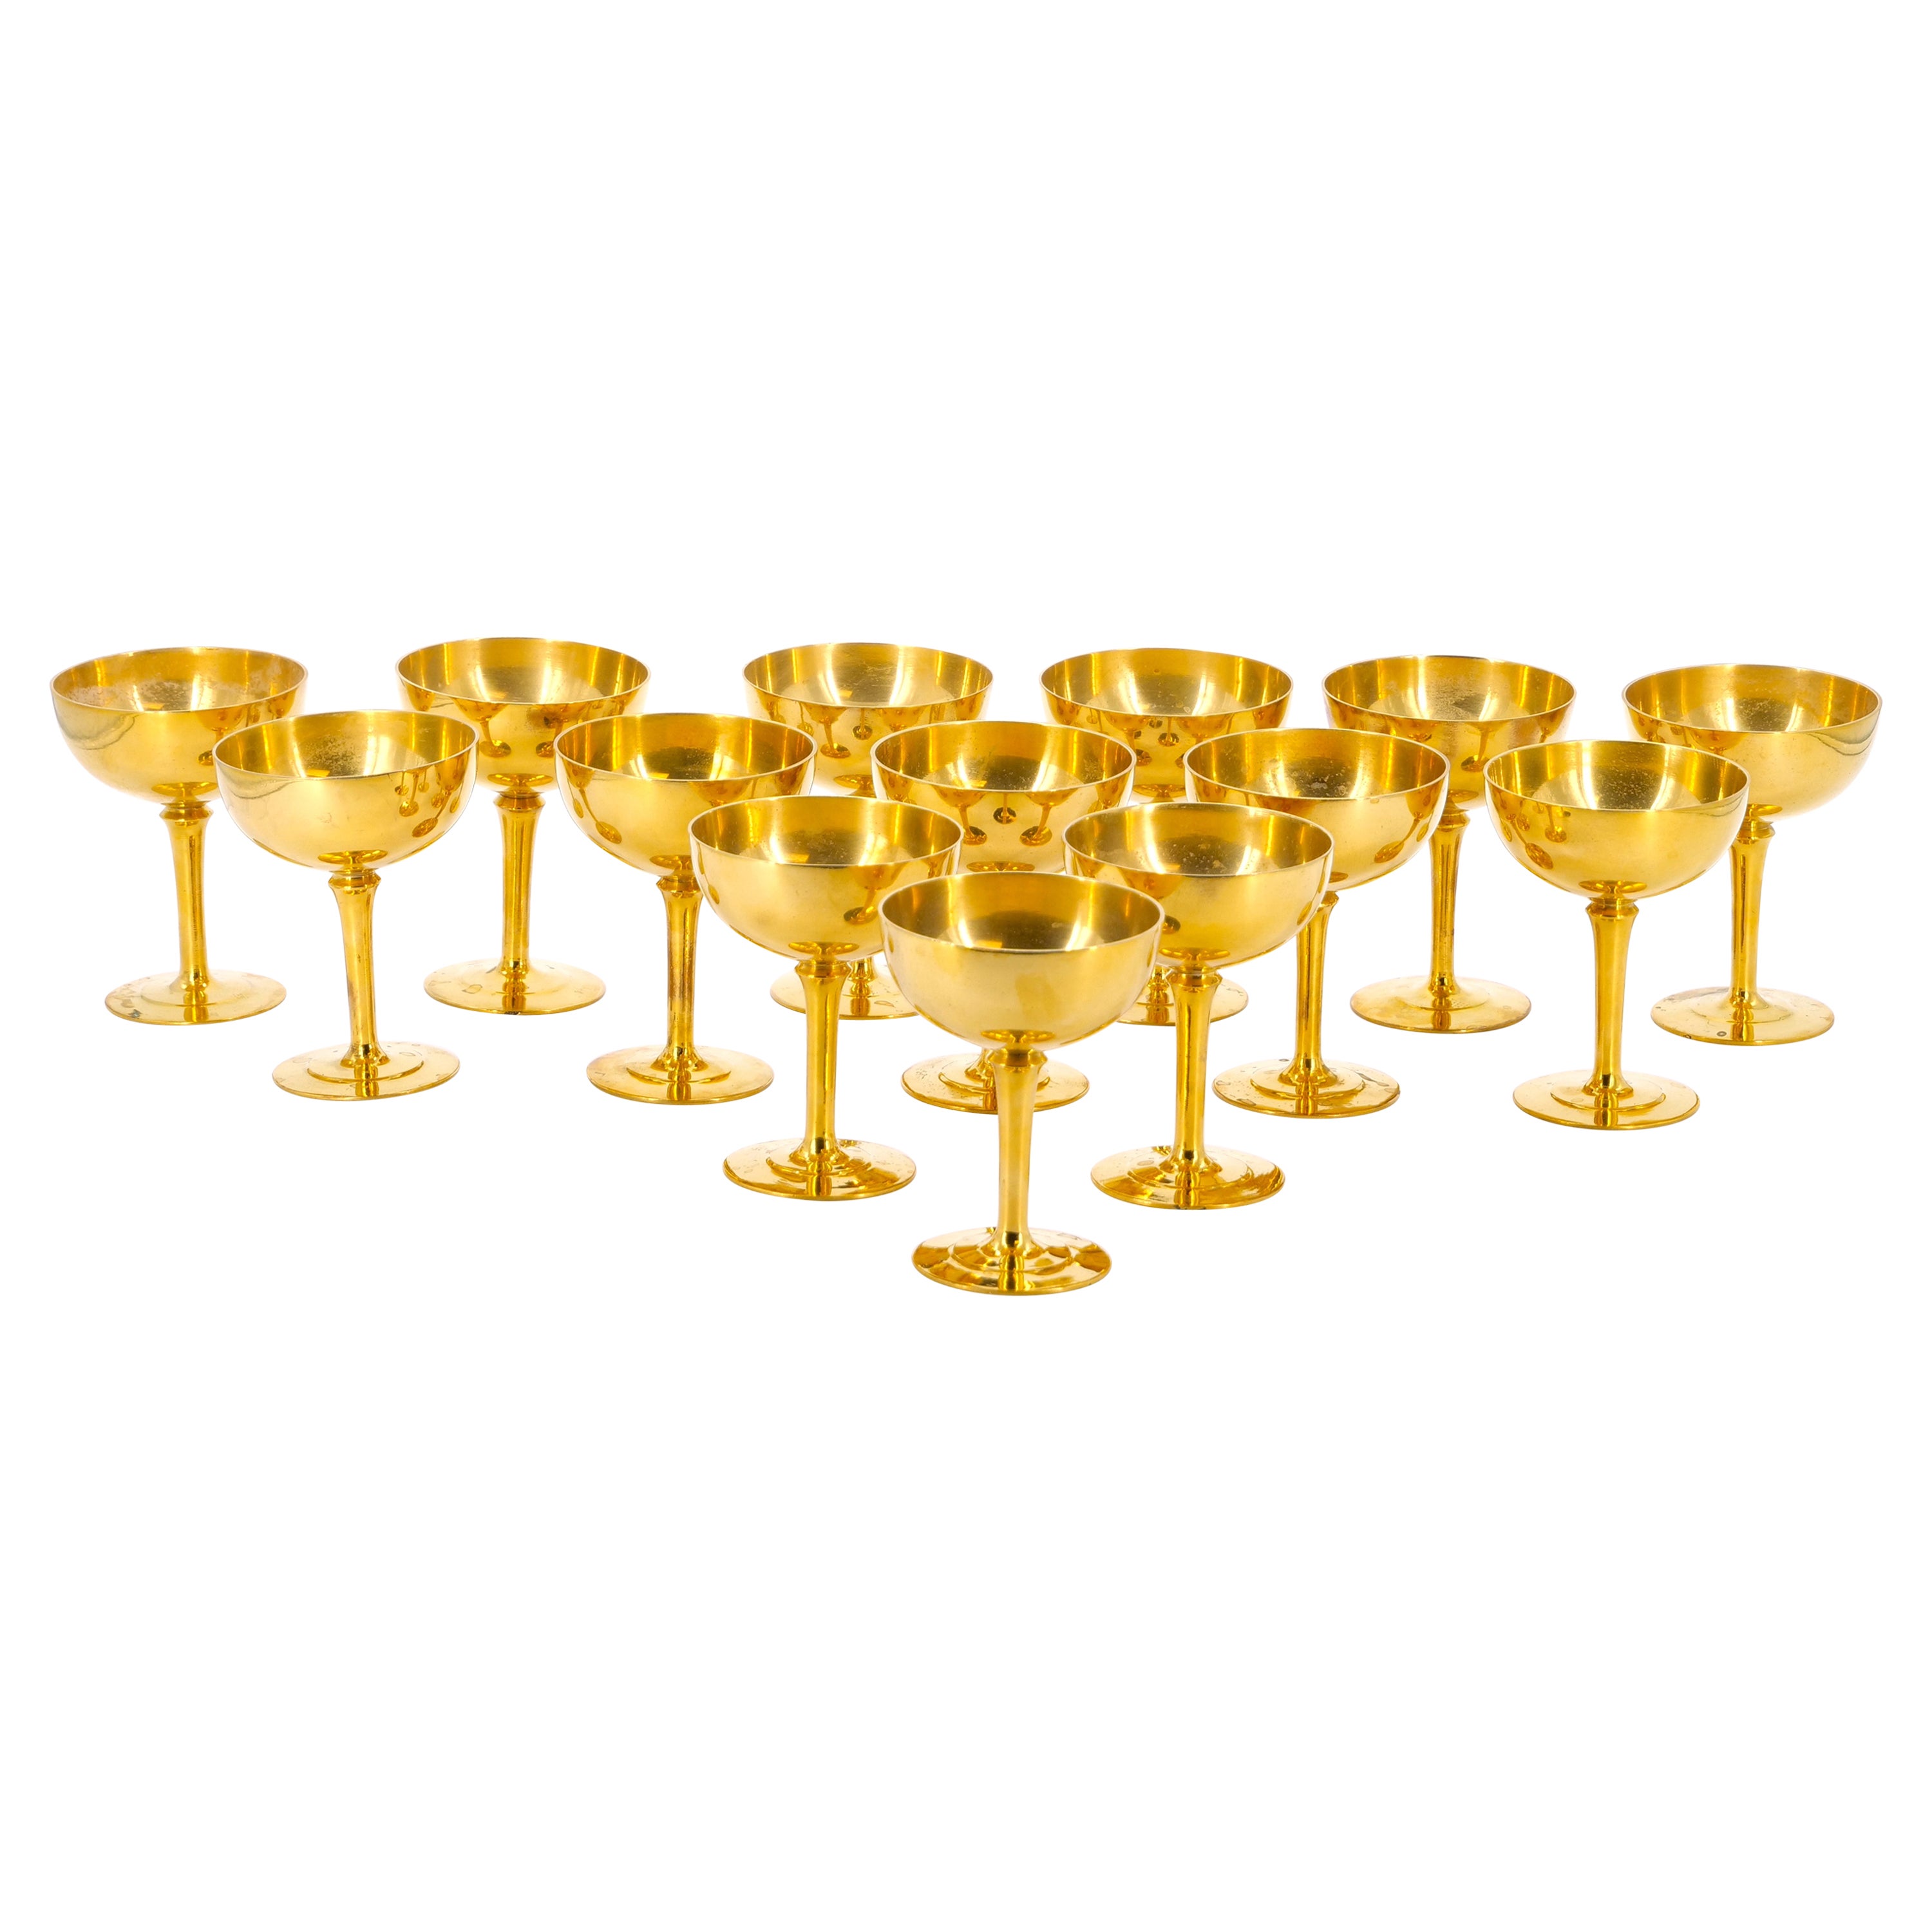 English Sheffield Gilt Champagne coupe / Wine Goblets Service / 14 People